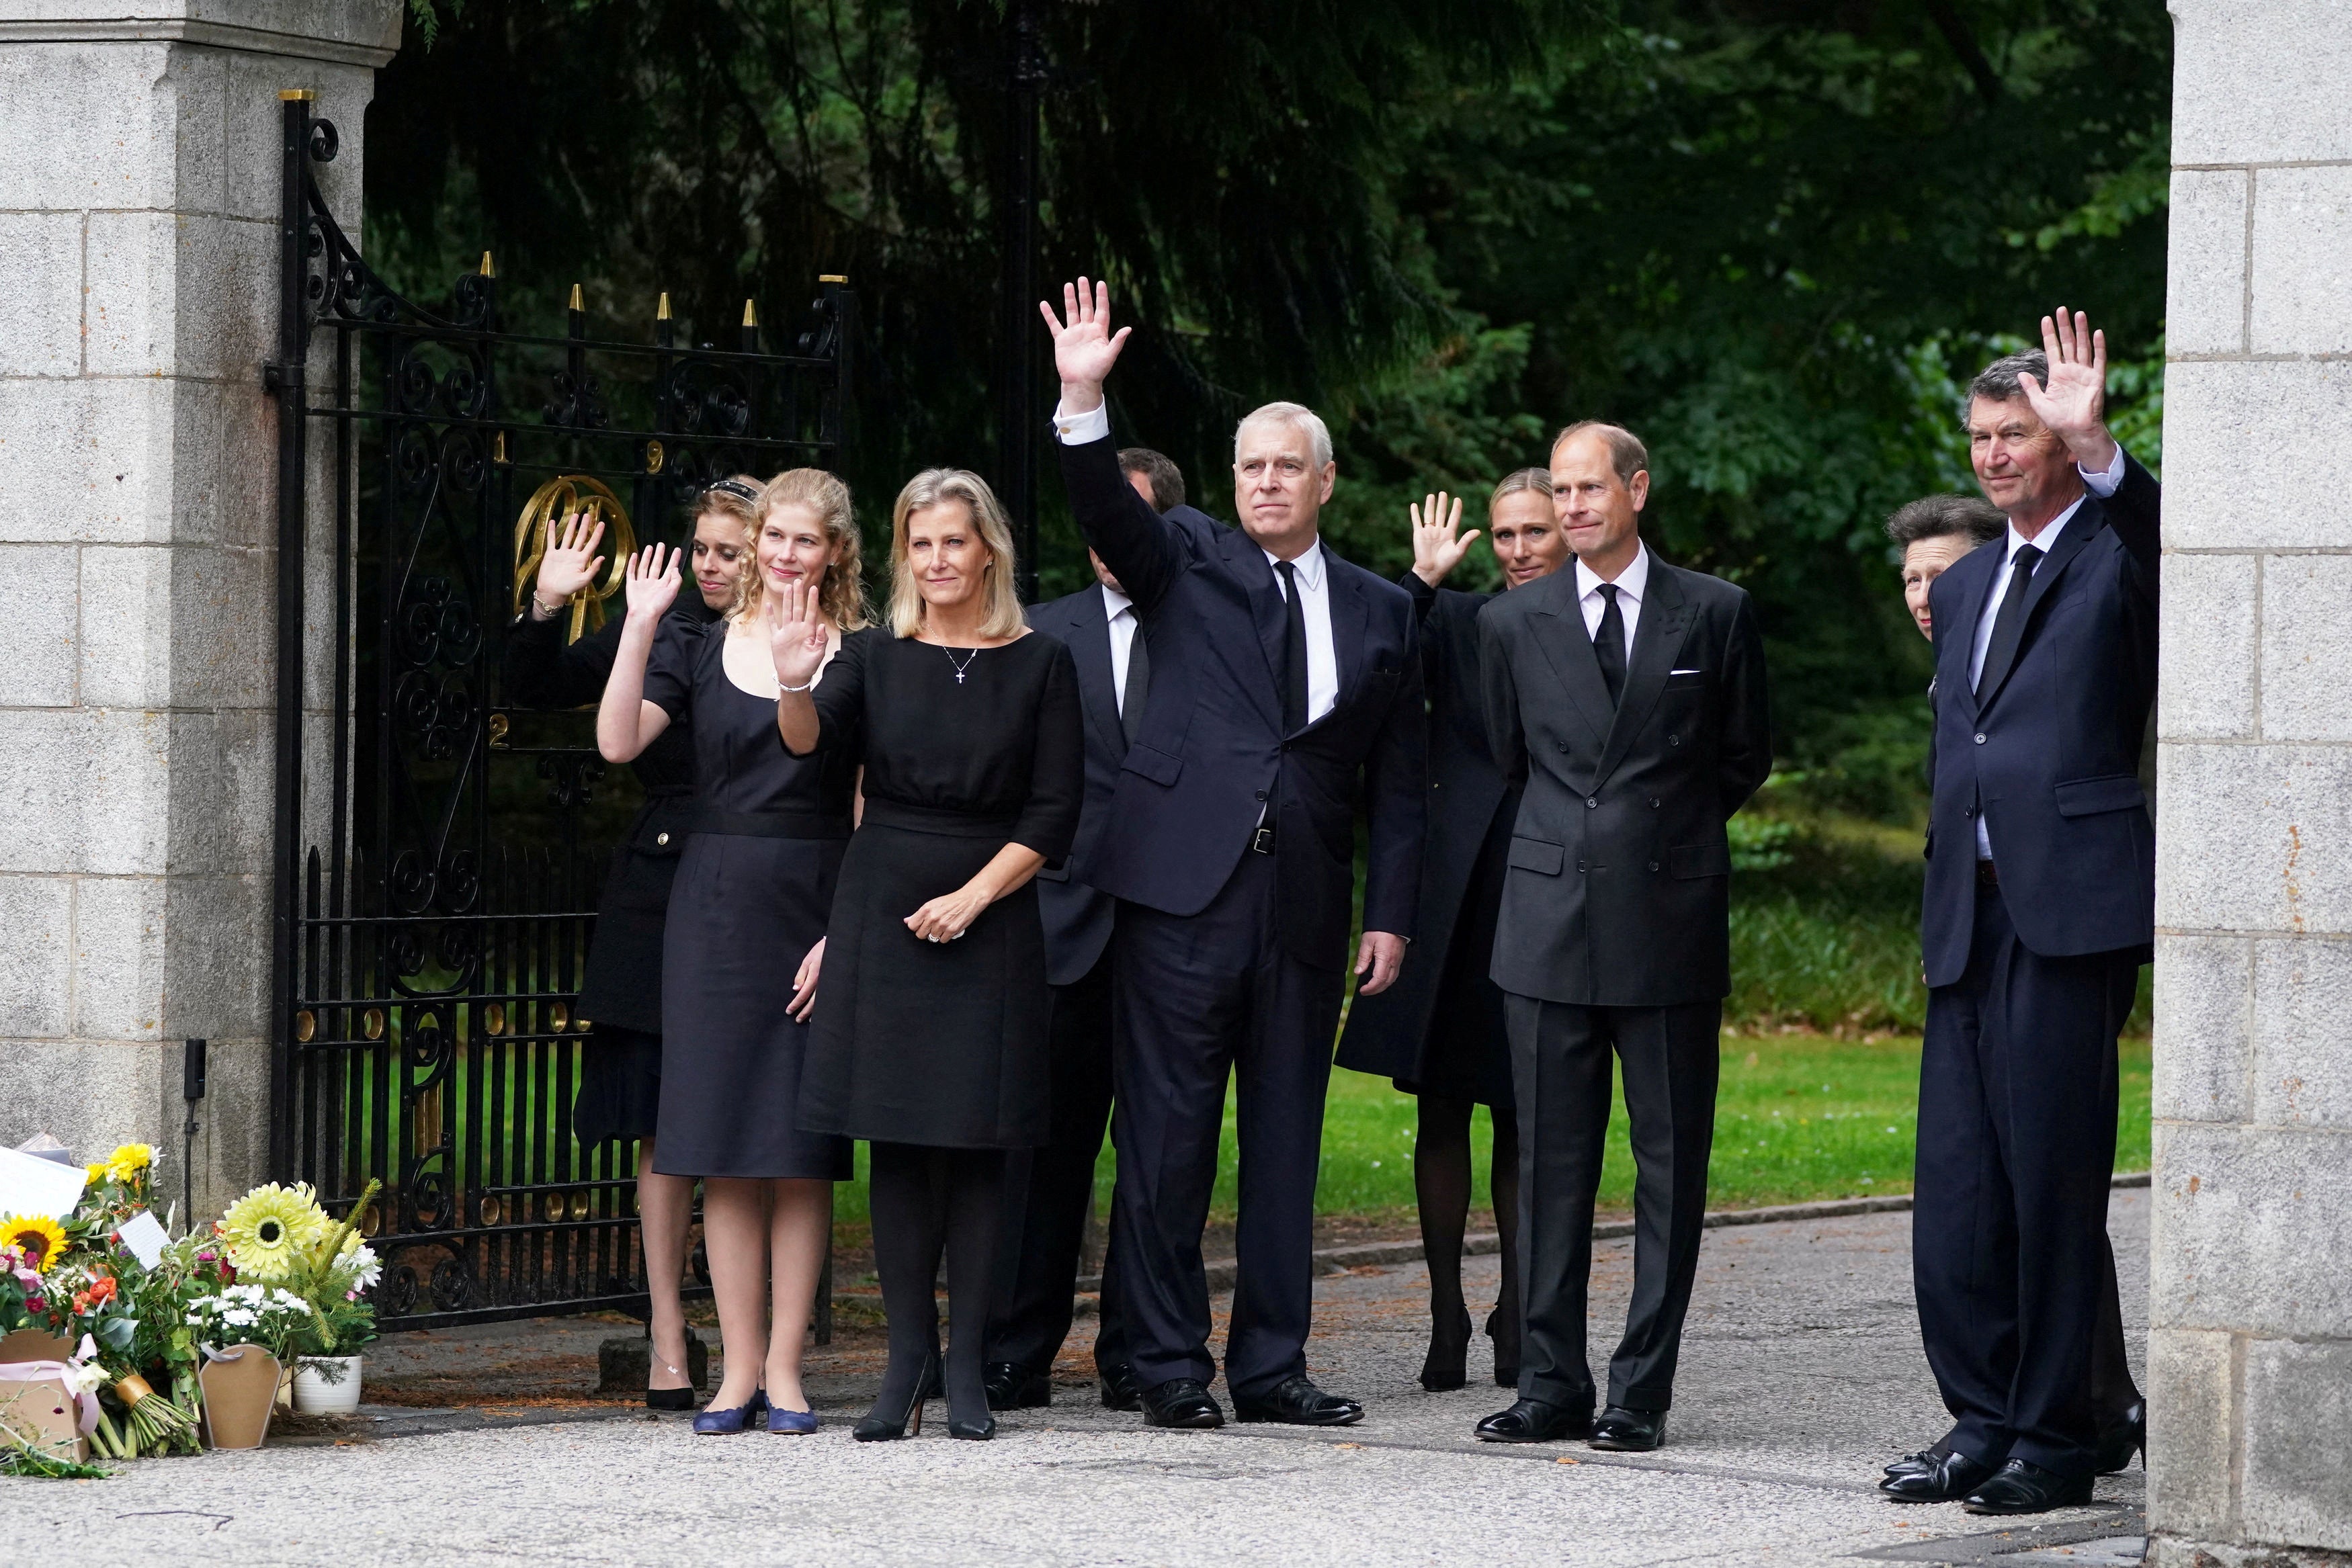 Princess Beatrice, Lady Louise Windsor, Sophie, Countess of Wessex, Prince Andrew, Duke of York, Zara Tindall, Prince Edward, Earl of Wessex and Vice Admiral Timothy Laurence wave to well-wishers outside Balmoral Castle,